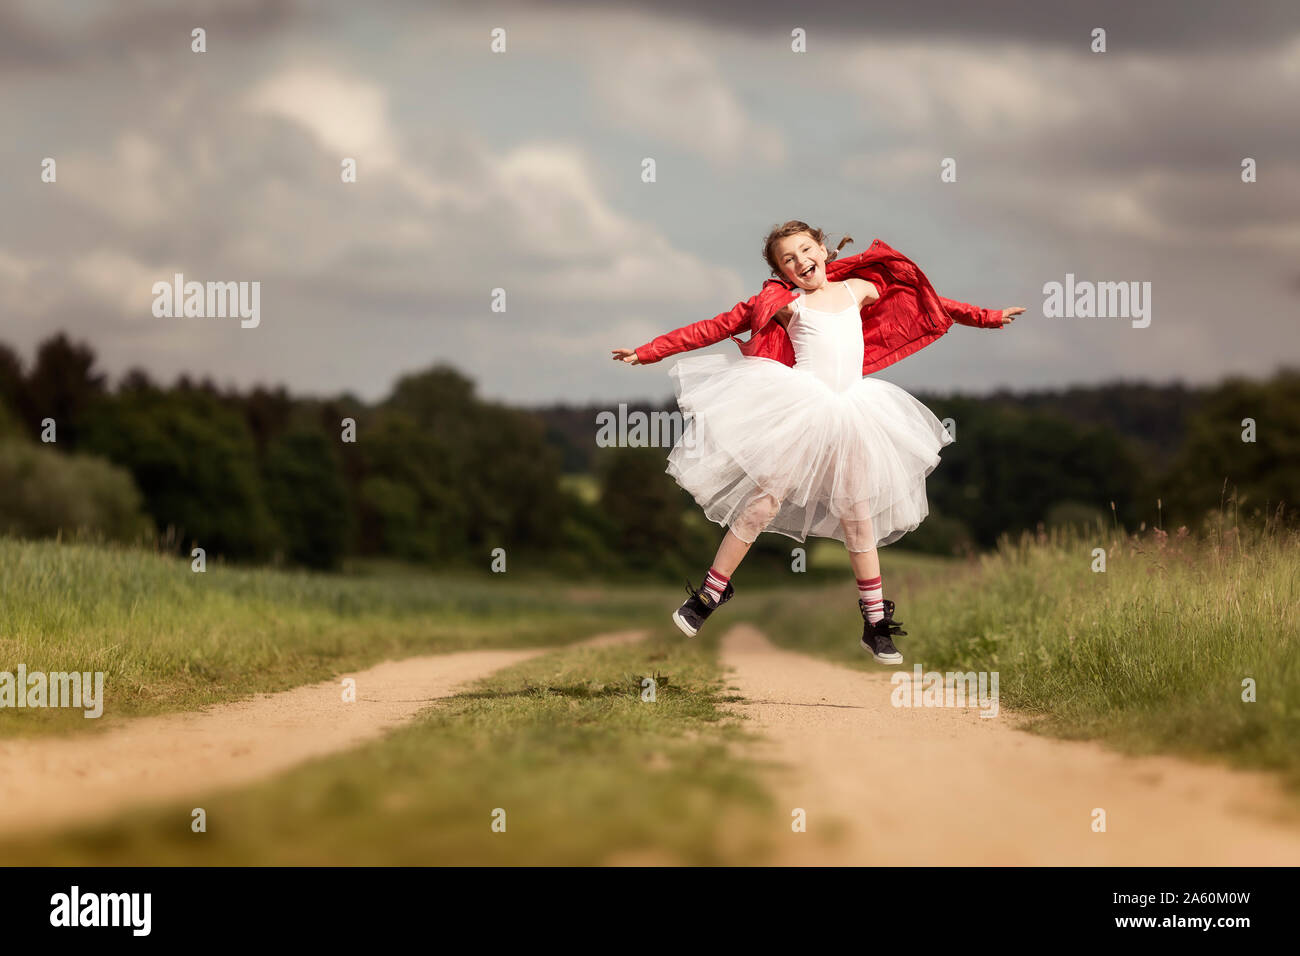 Portrait of happy girl wearing red leather jacket and tutu jumping in the air on dirt track Stock Photo